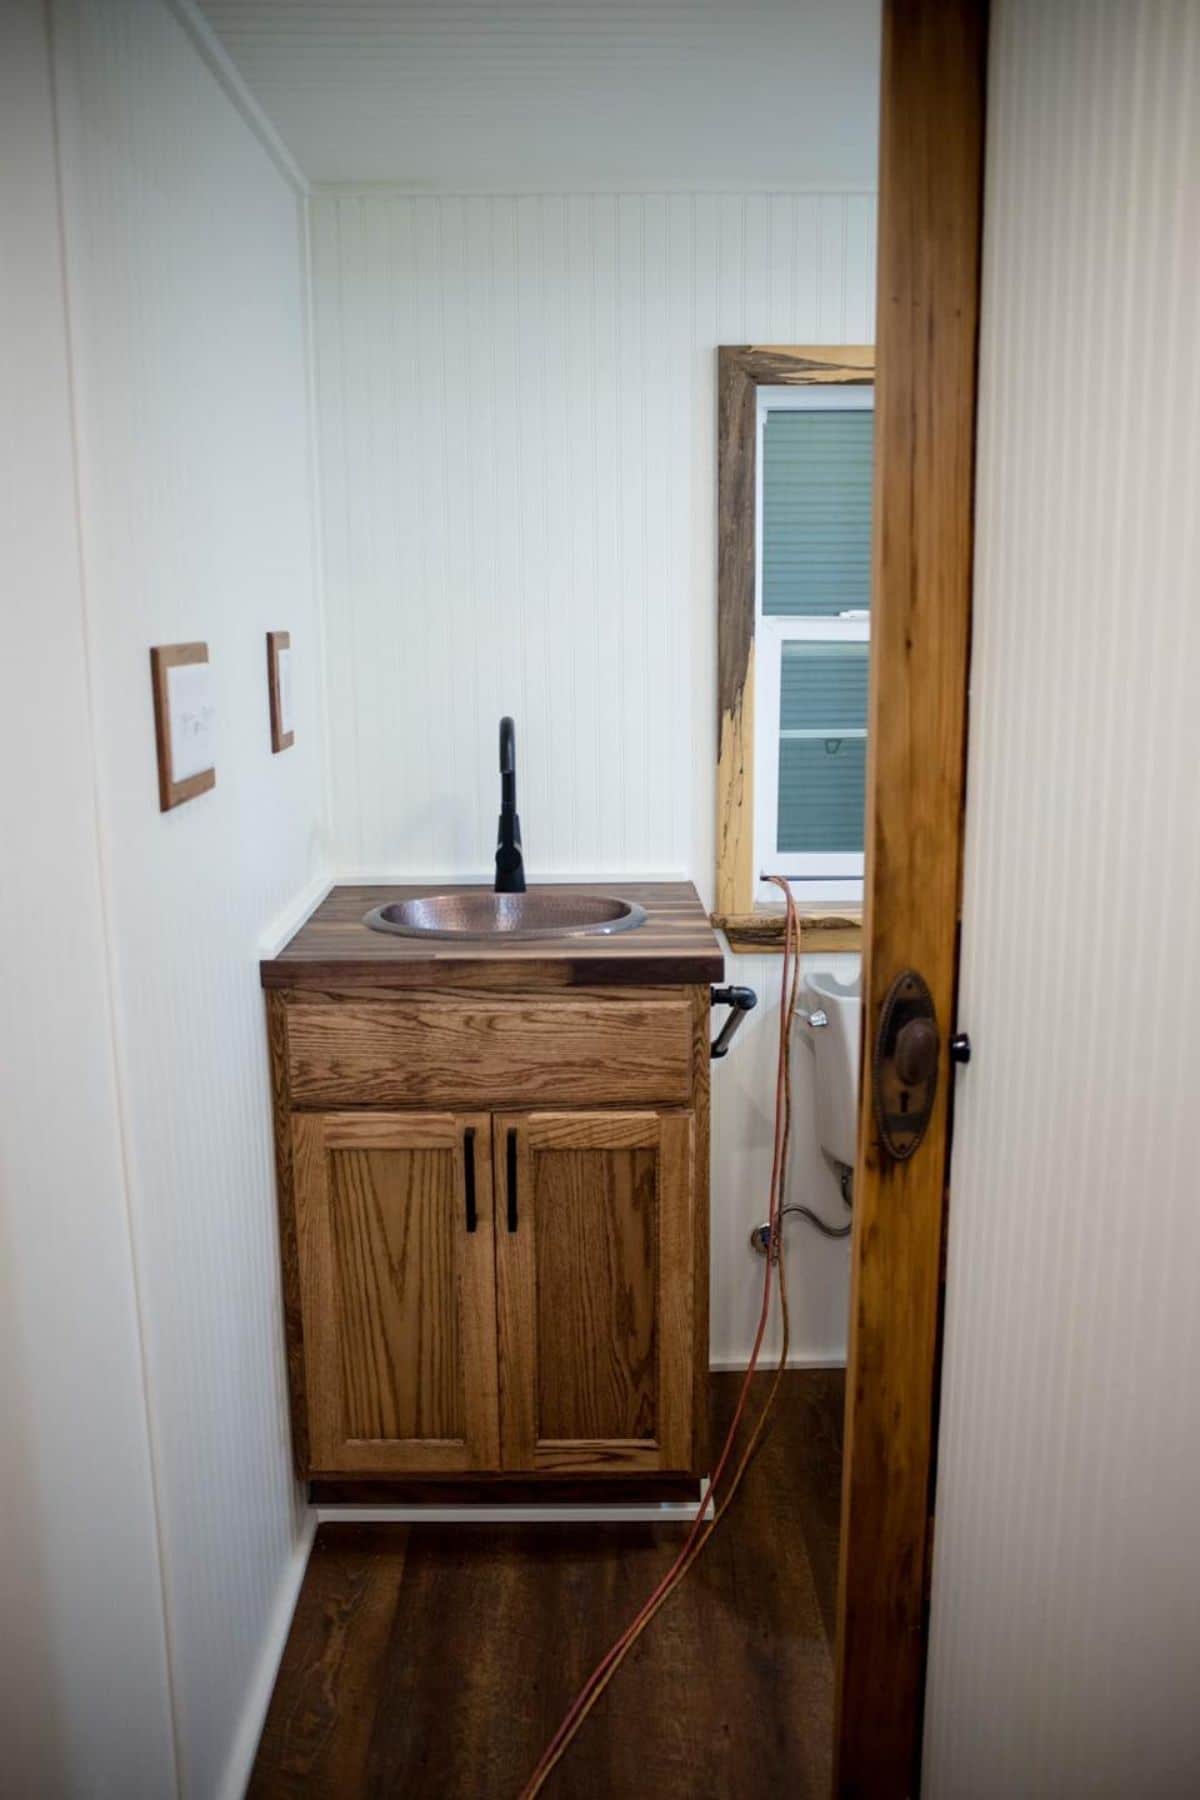 wooden bathroom cabinet against wall